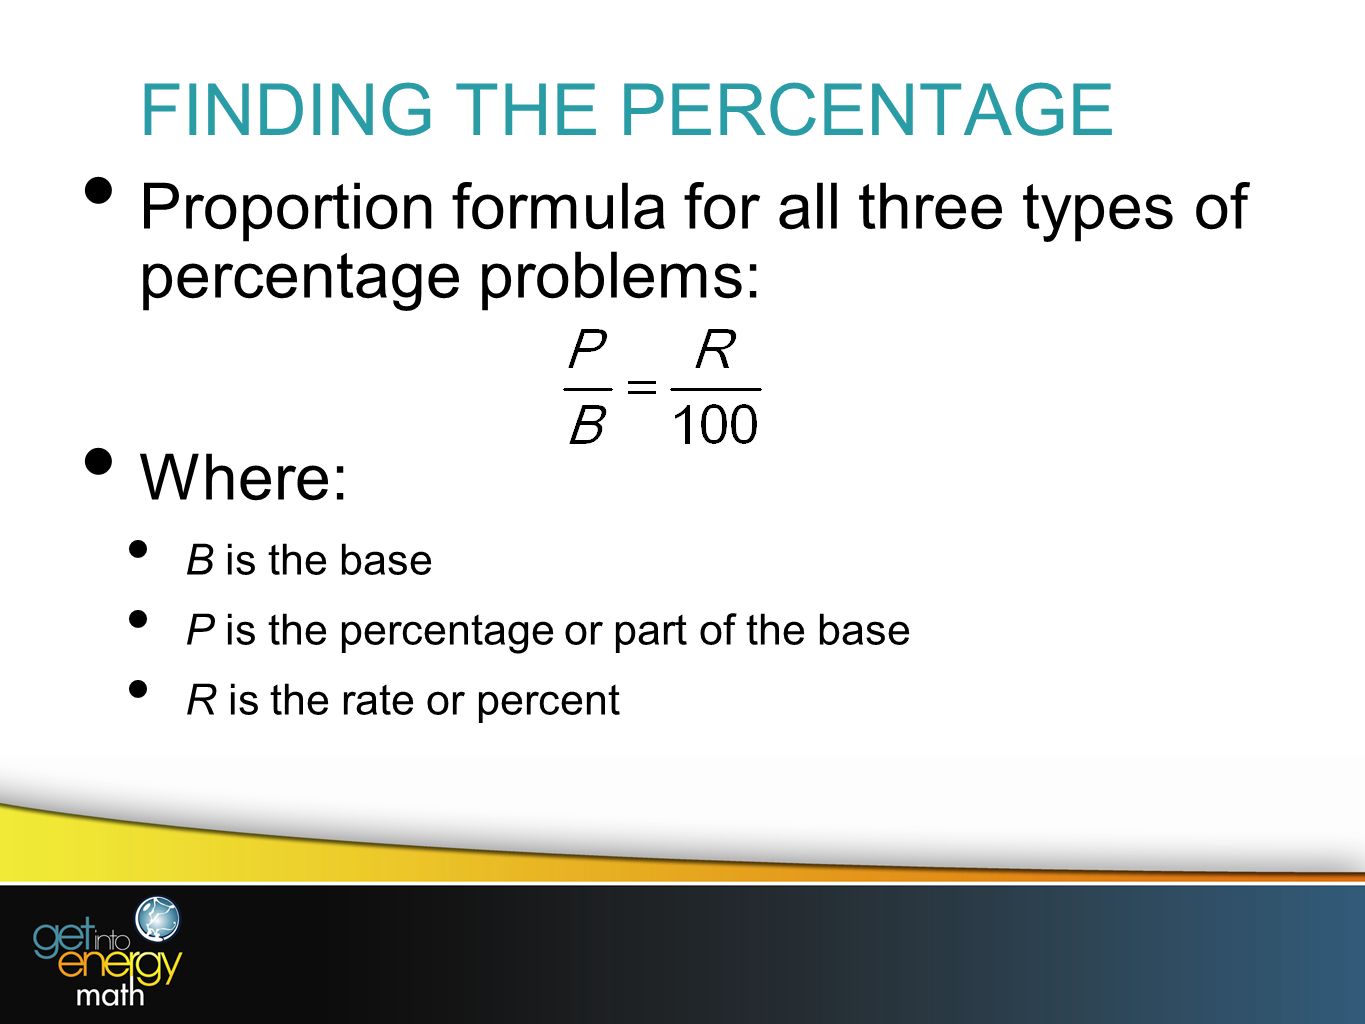 FINDING THE PERCENTAGE Proportion formula for all three types of percentage problems: Where: B is the base P is the percentage or part of the base R is the rate or percent